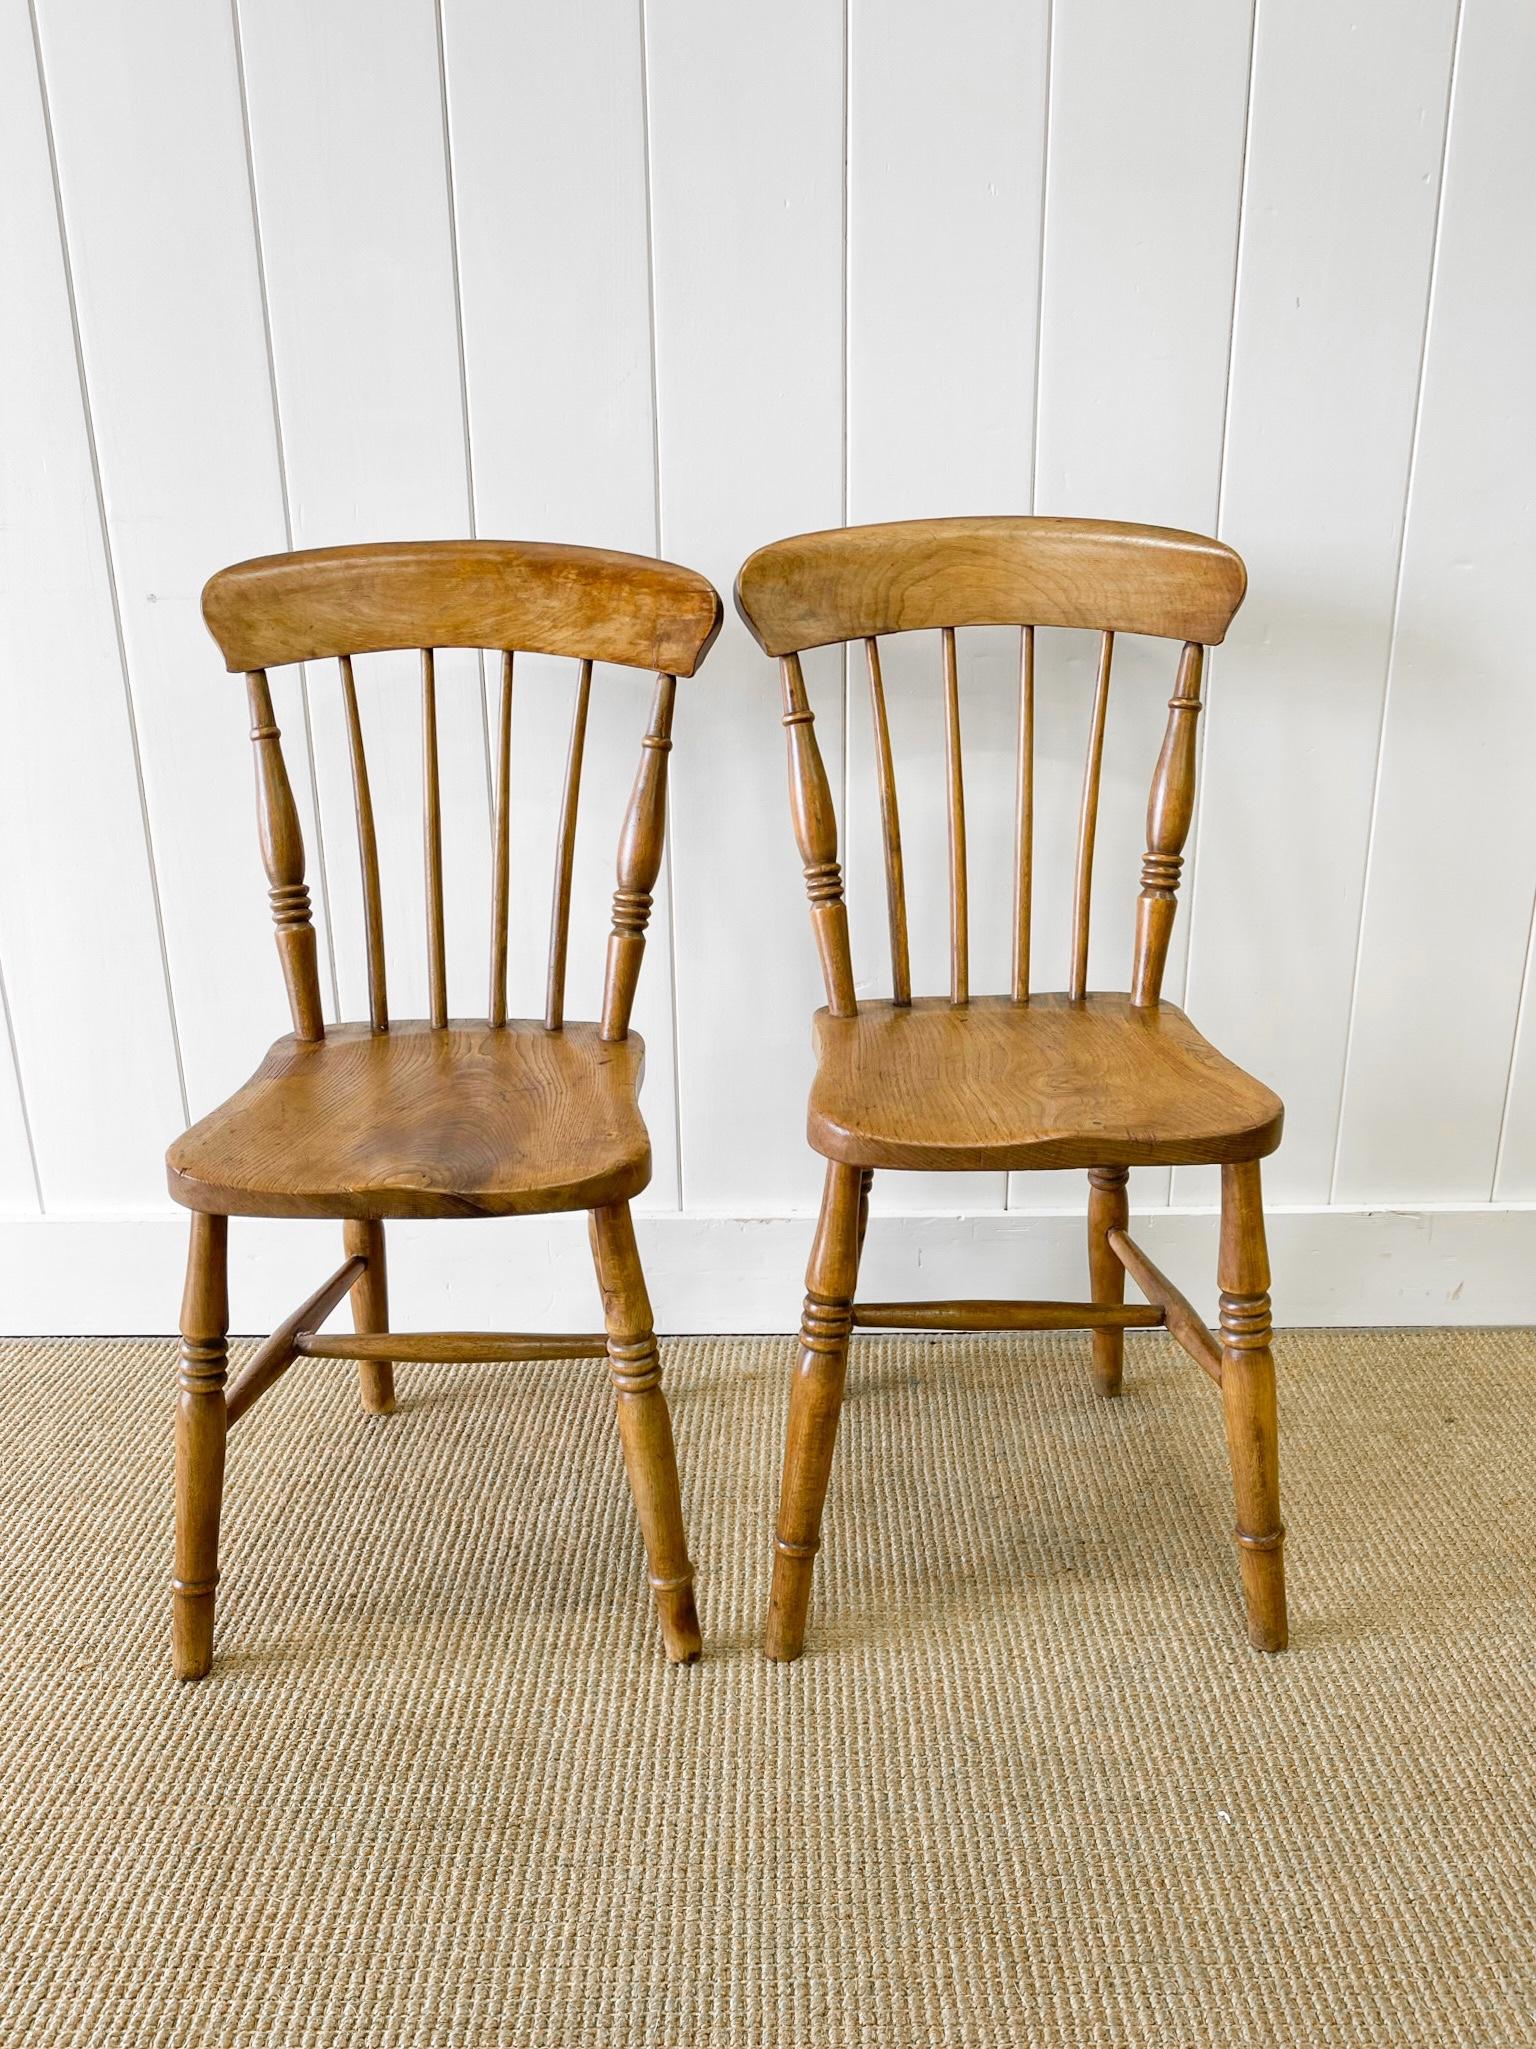 British An Antique Set of 4 Early 19th Century Stick Back Chairs For Sale